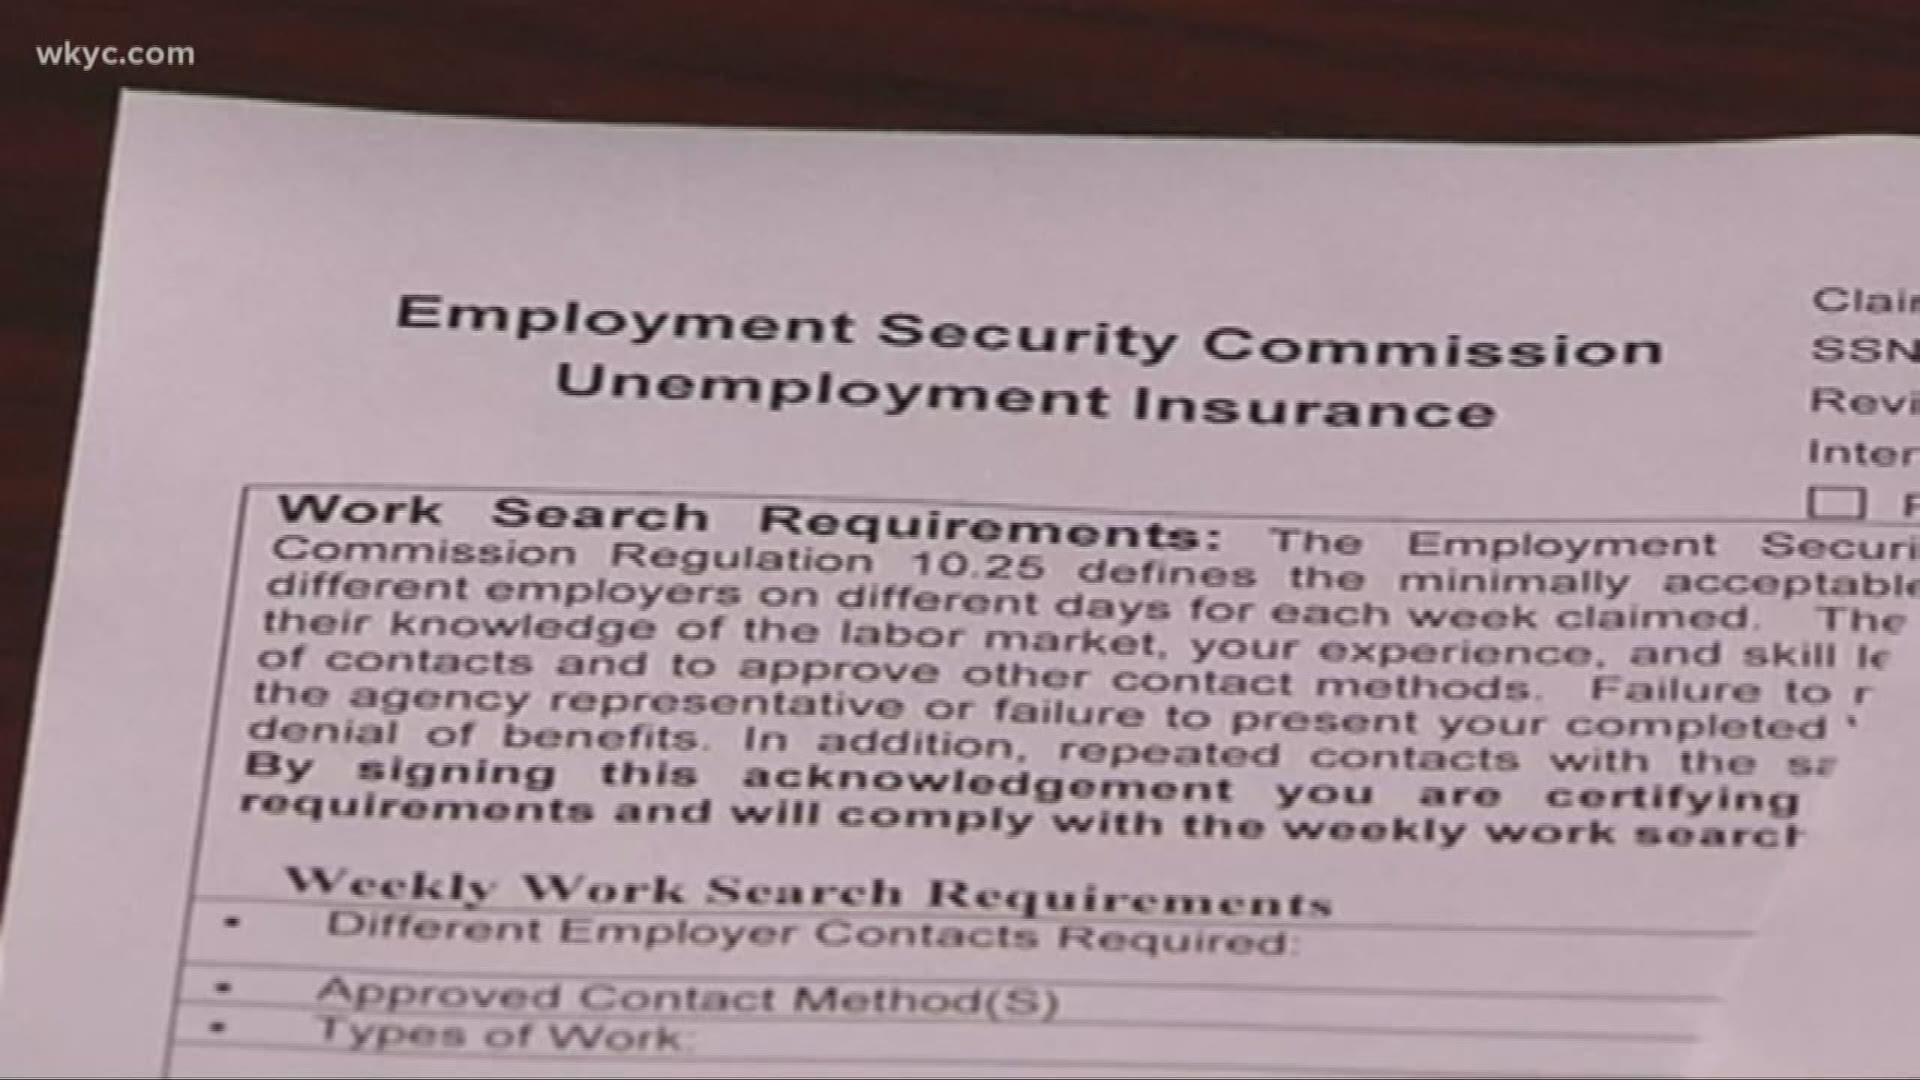 3News viewers have been emailing and calling us, saying they’re having issues getting on and using the unemployment website. 3News' Rachael Polansky reports.